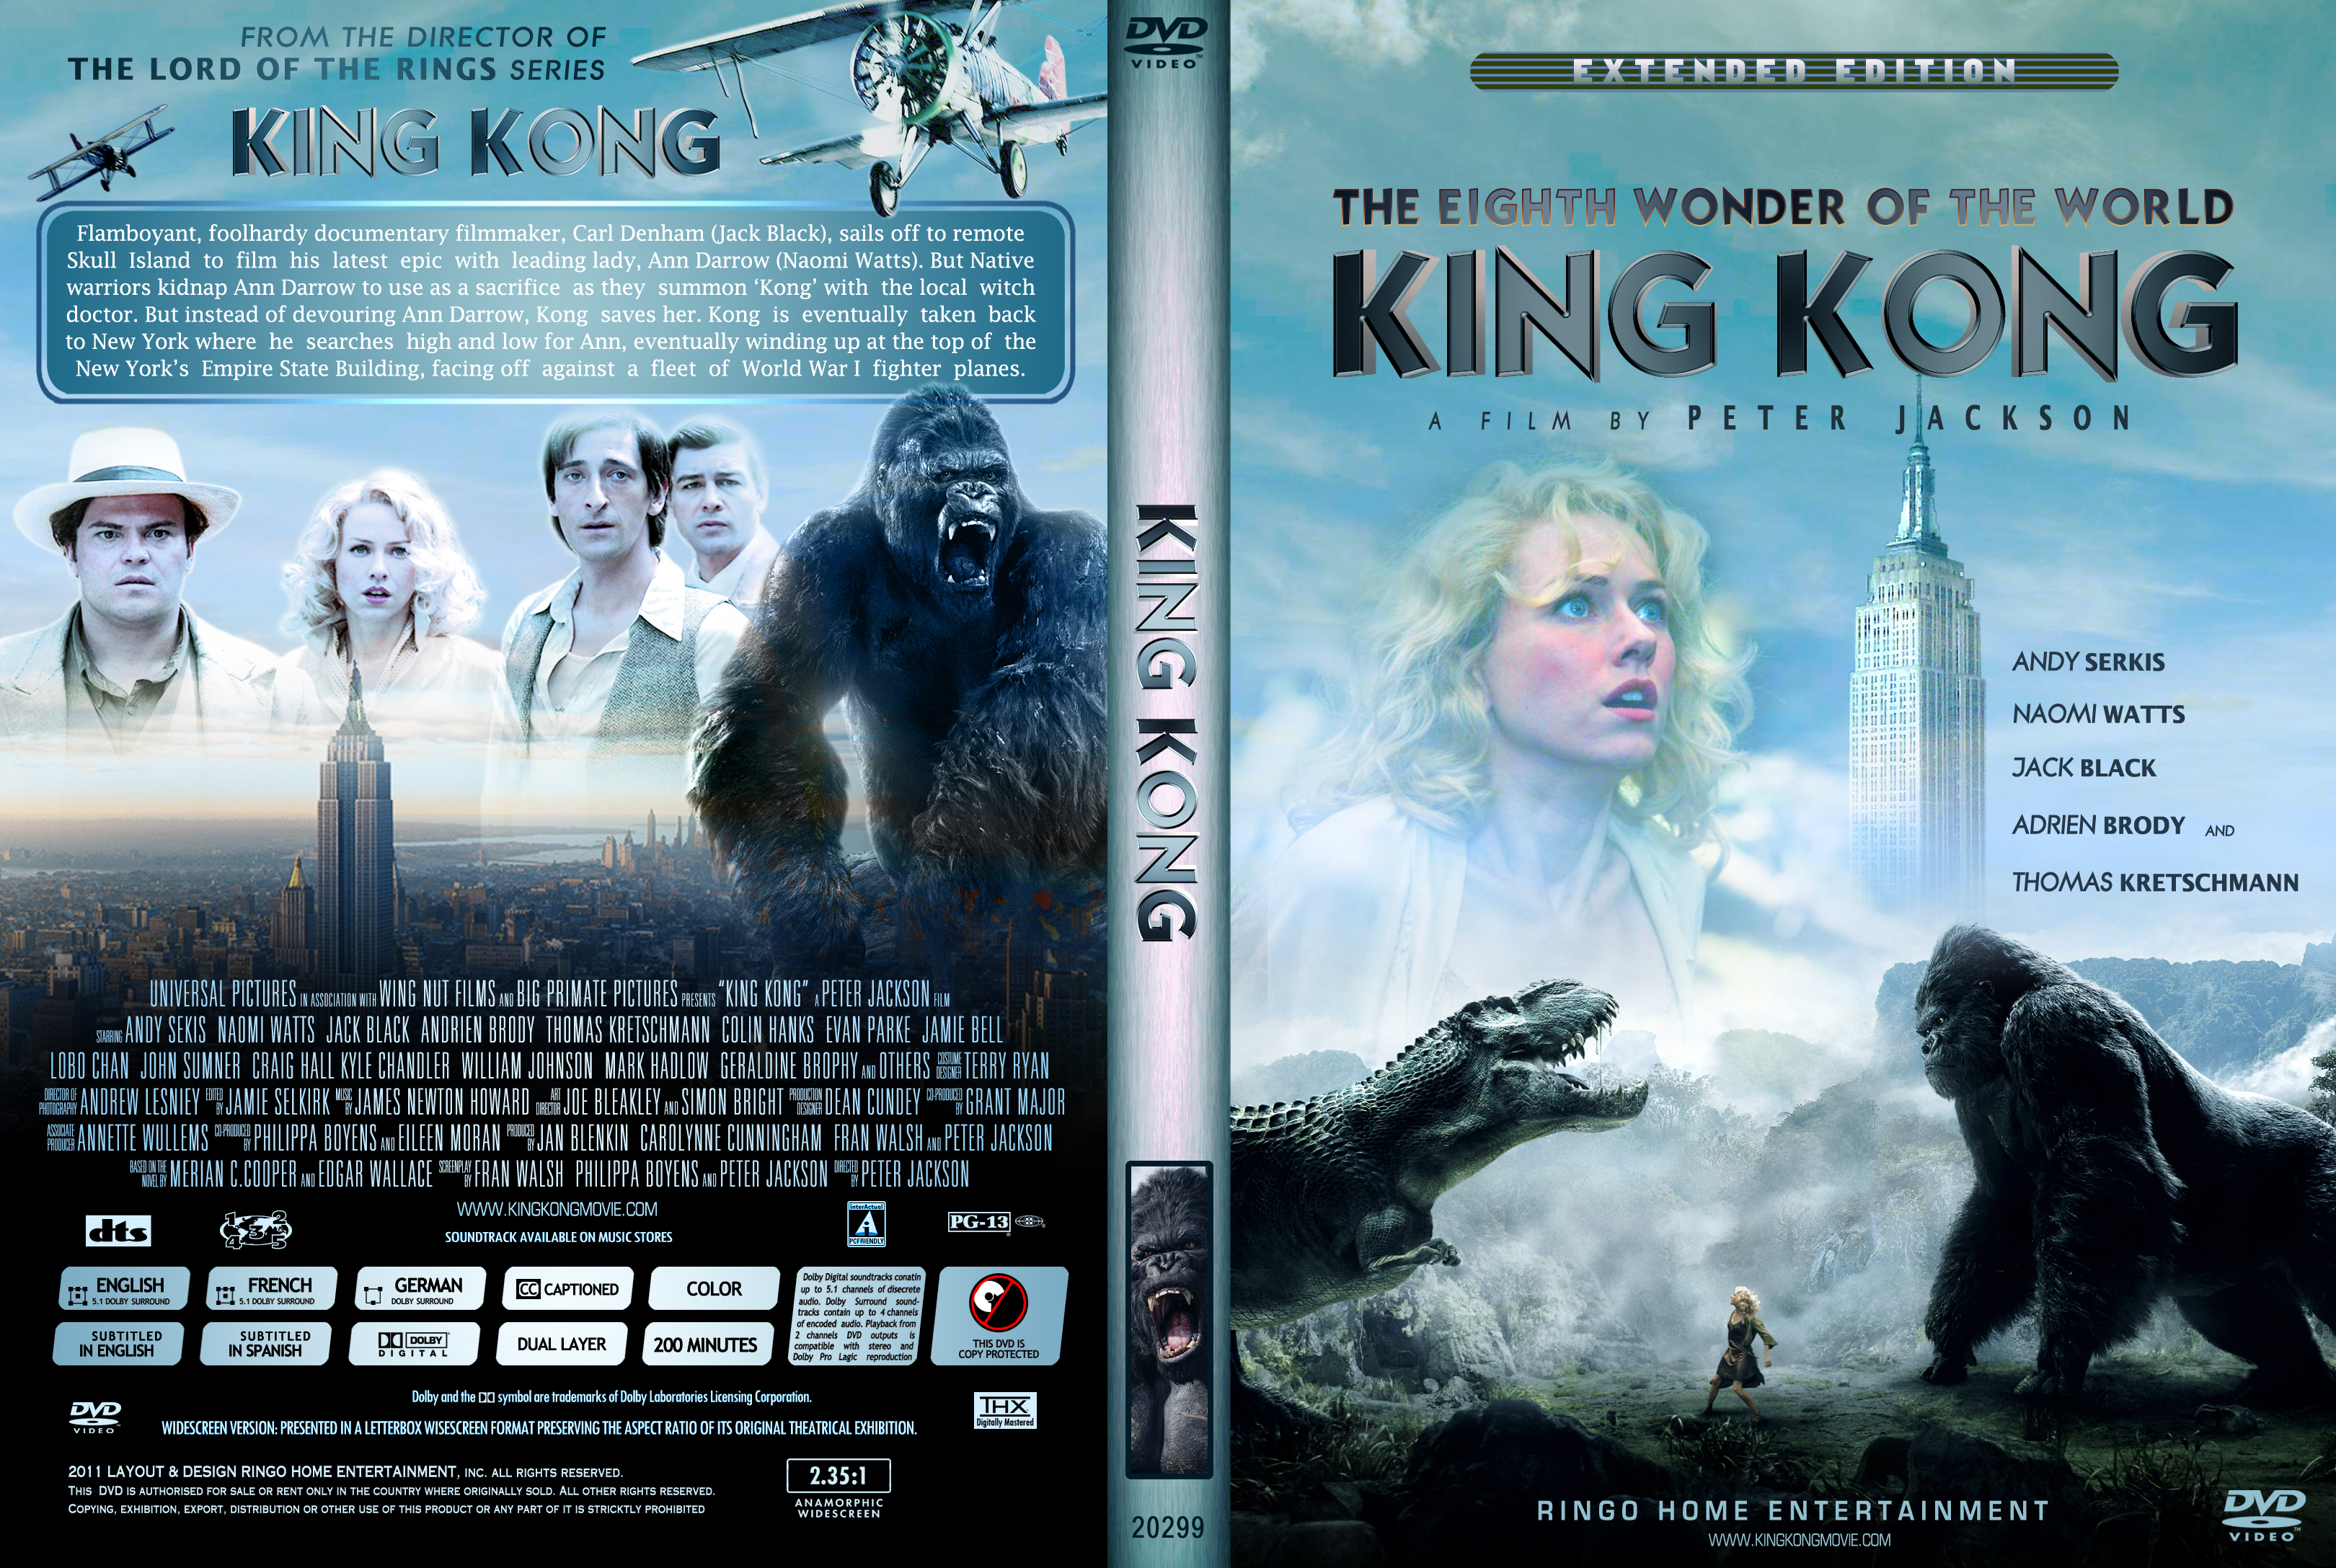 King kong new empire. Covers DVD Кинг Конг 2005. Кинг Конг. 2005 DVD Cover обложка. Кинг Конг 2005 Постер. Кинг Конг афиша.